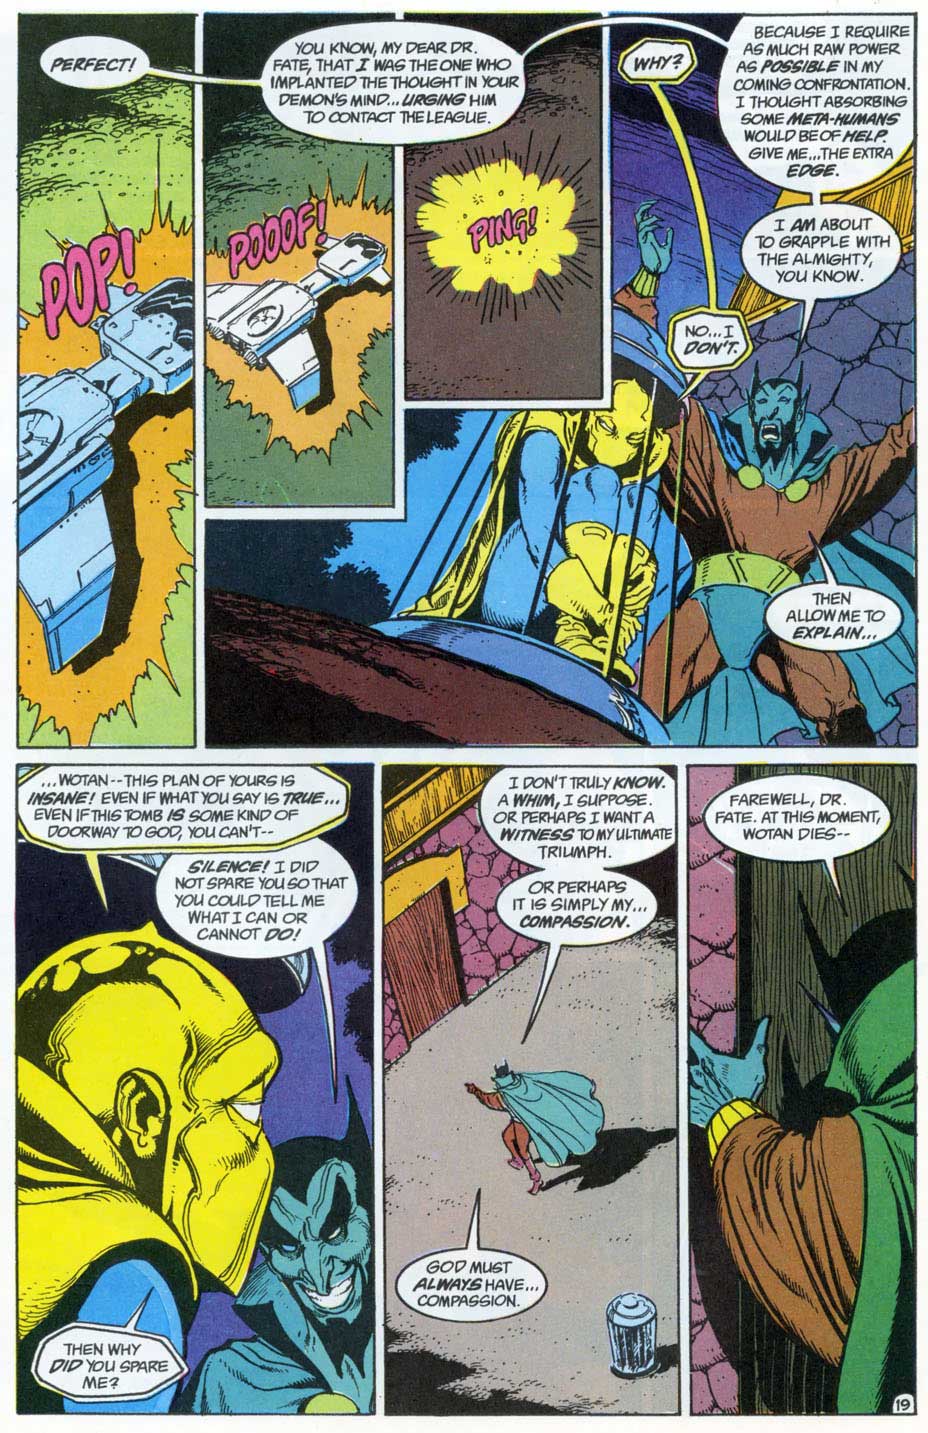 Dr Fate #15 written by J.M. DeMatteis with art by Shawn McManus